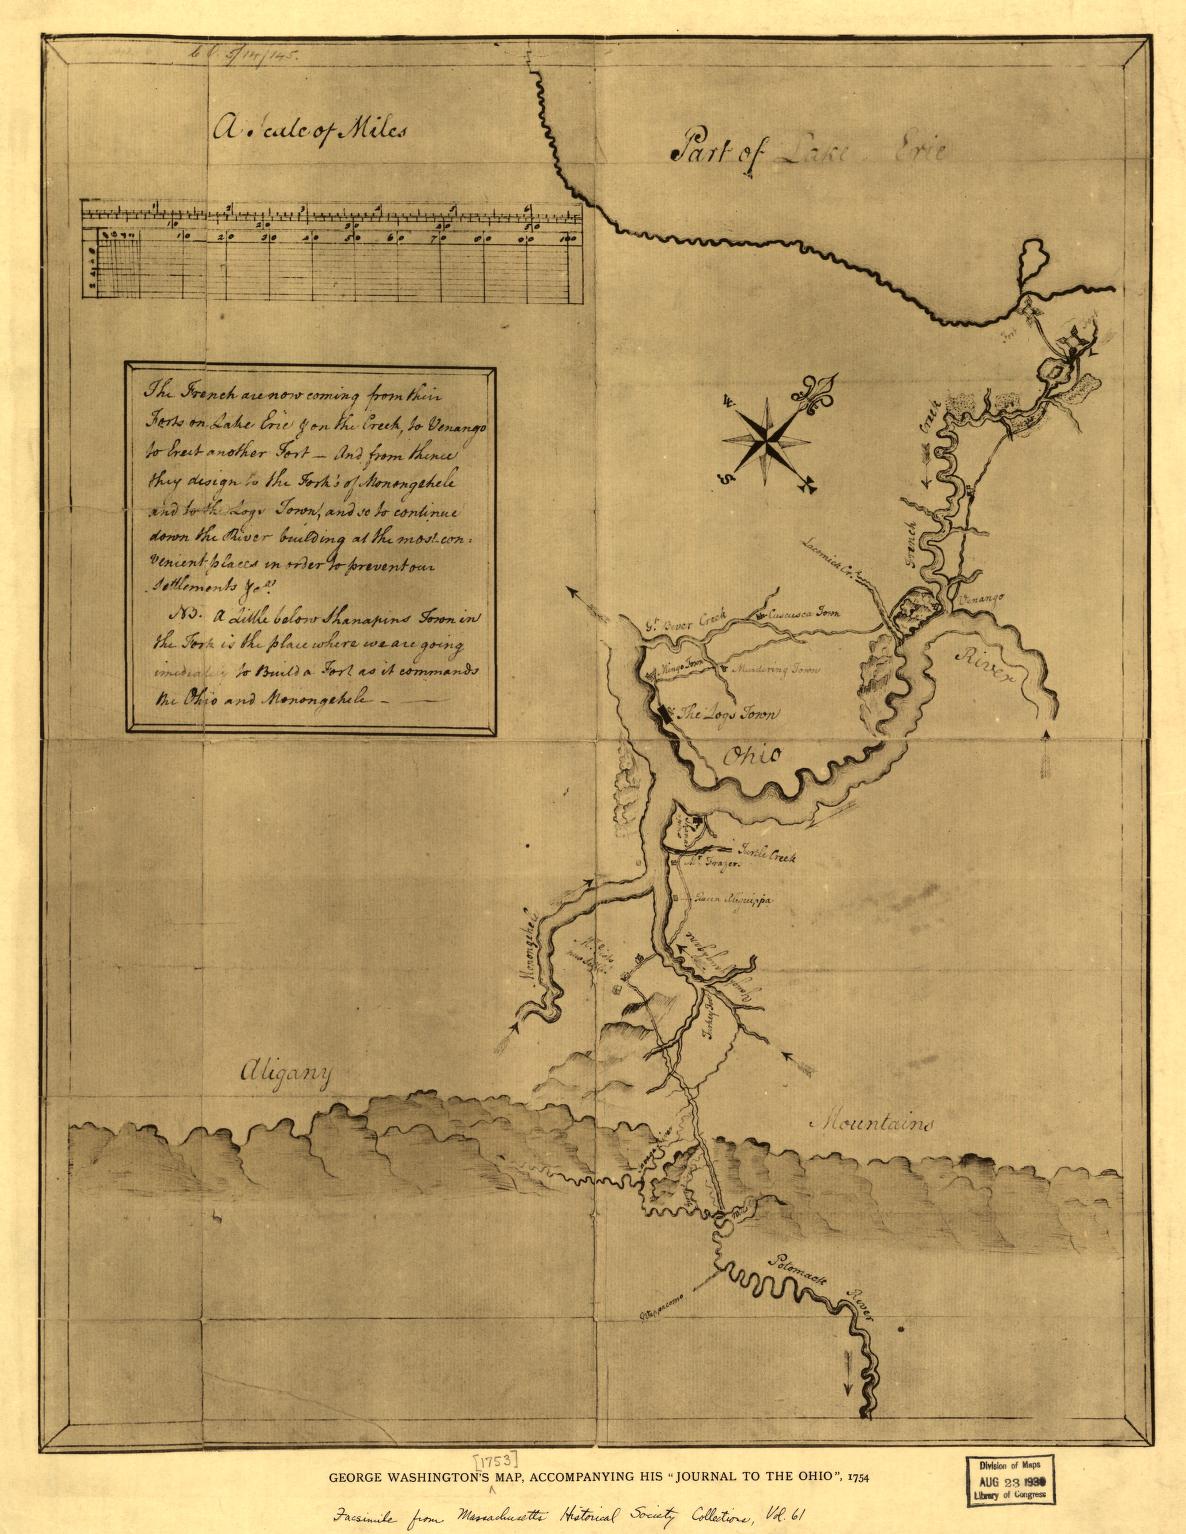 Map attached to George Washington's journal to the Ohio